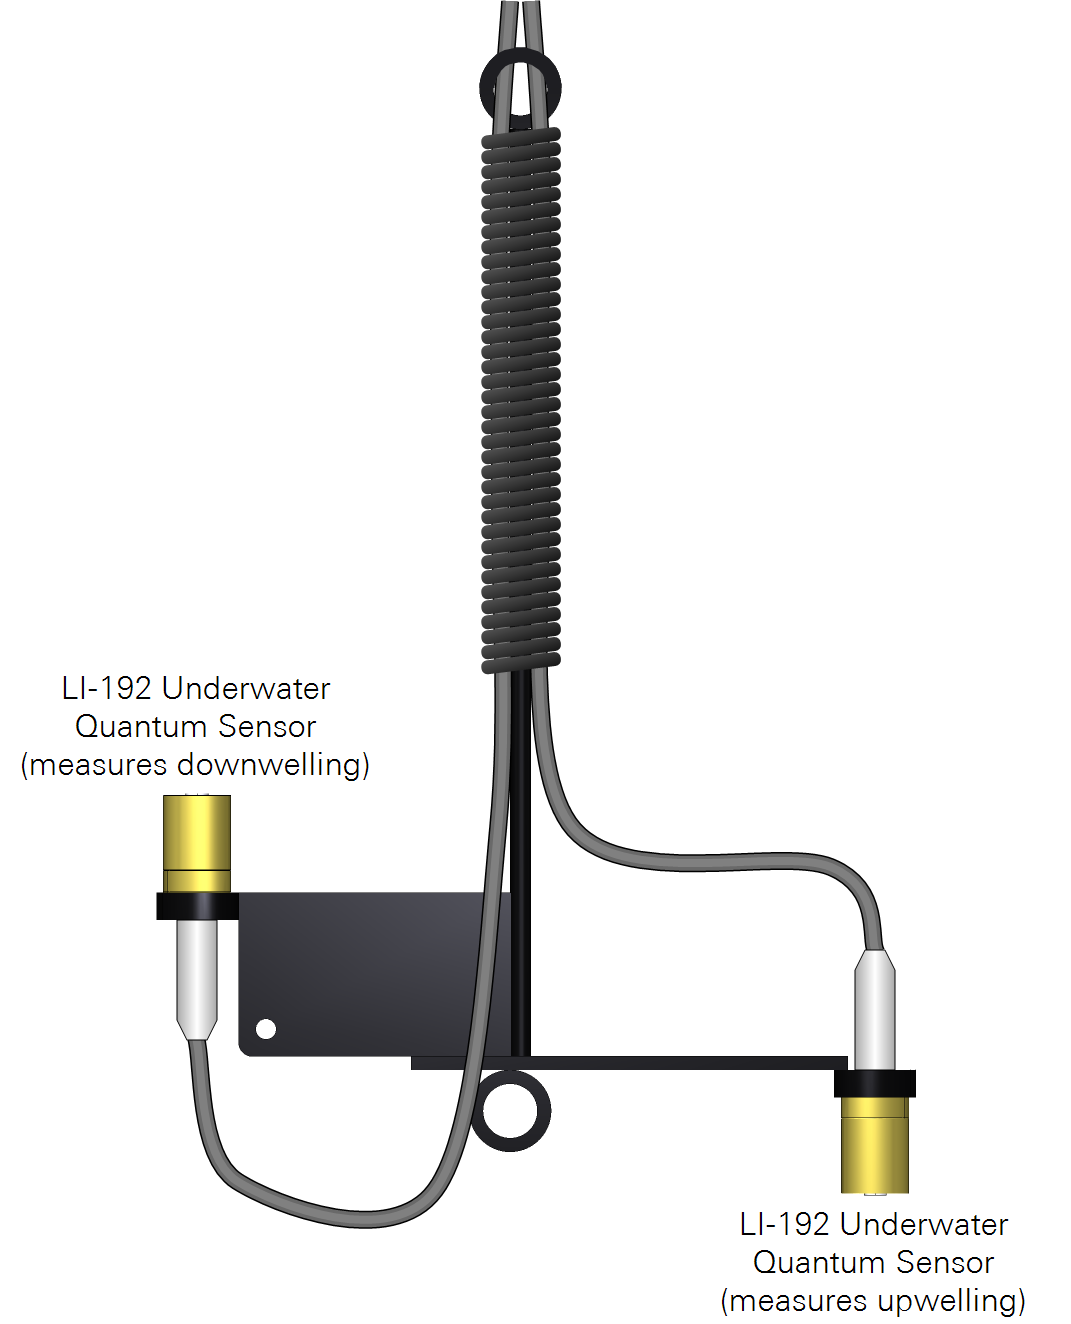 The weight of two LI-192 sensors is sufficient to lower the frame in a water column.